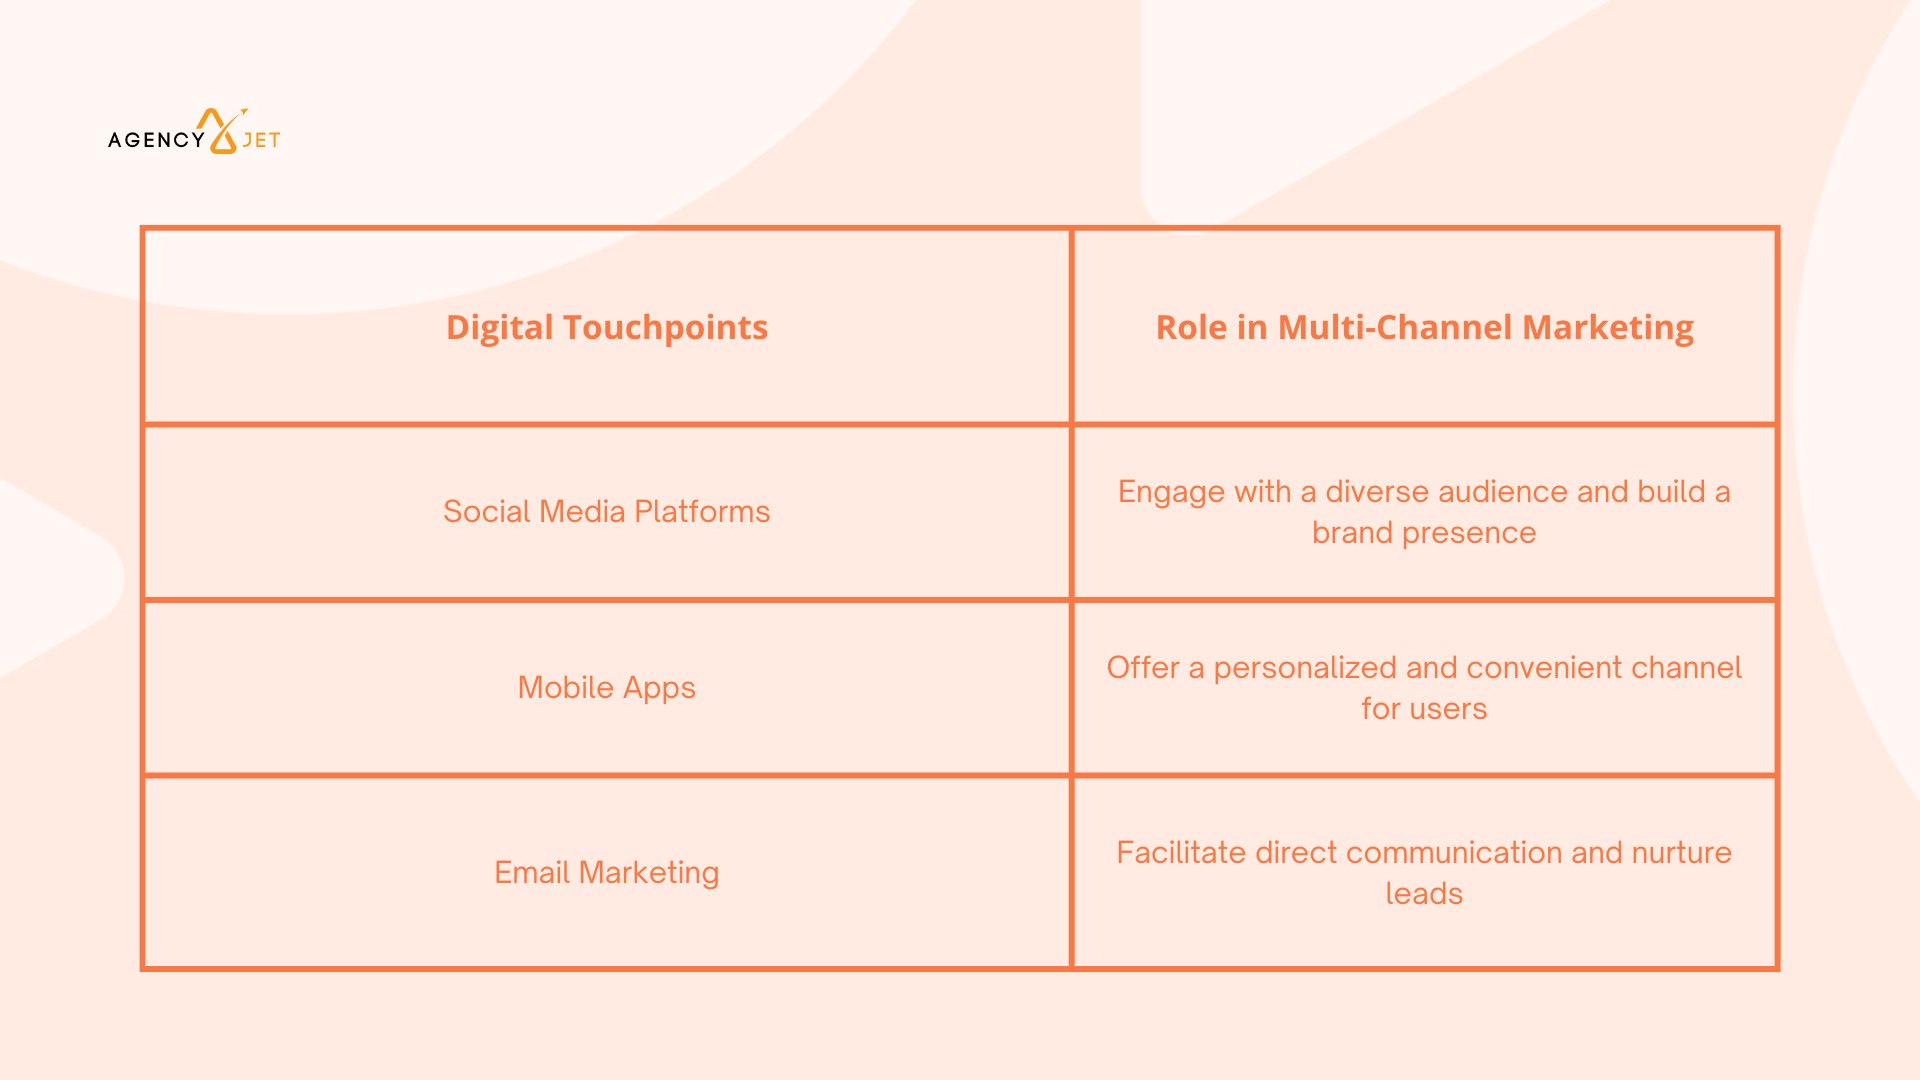 Digital Touchpoints